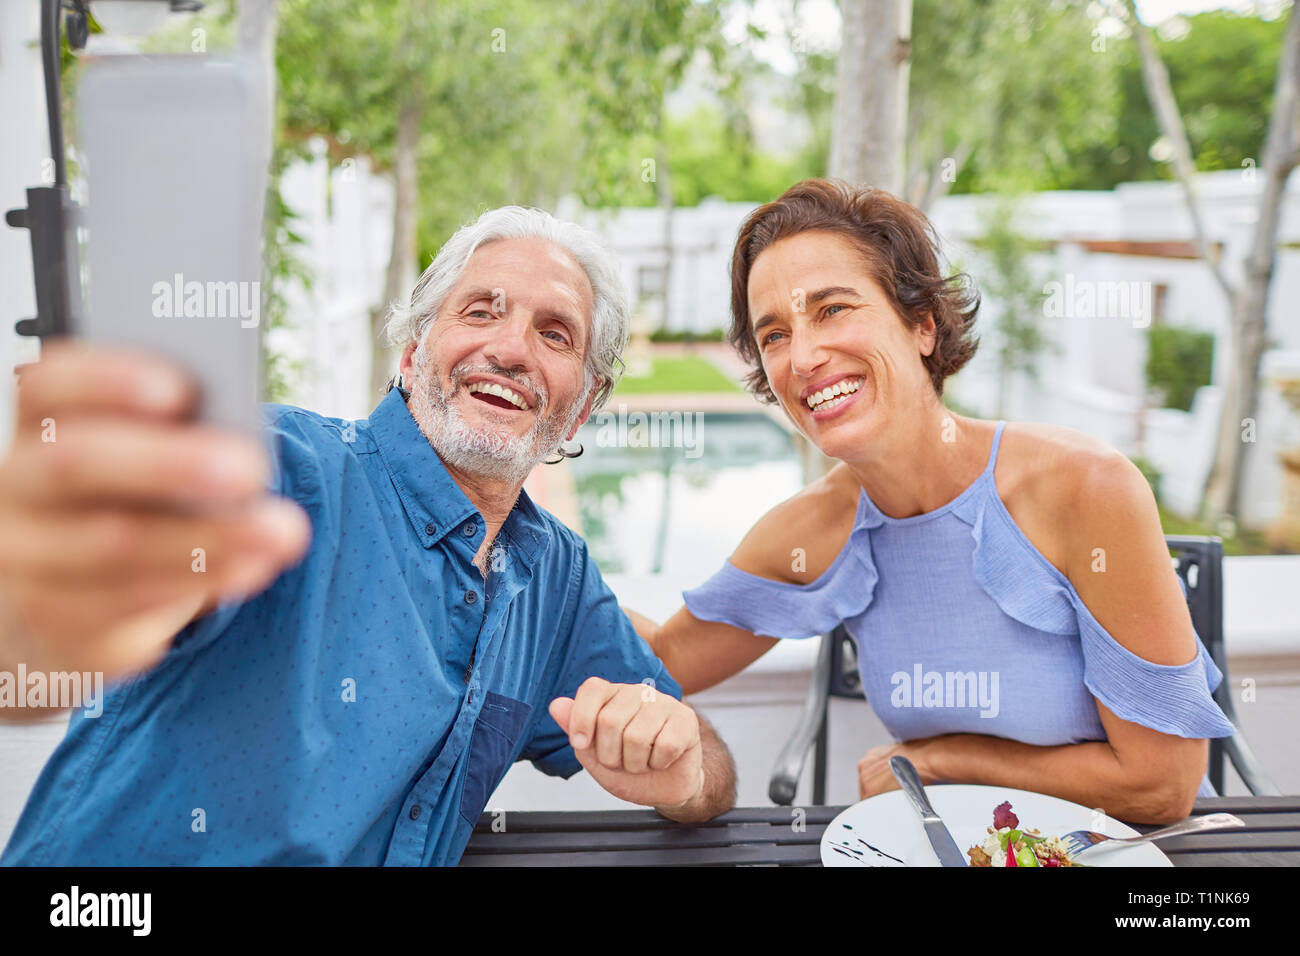 Mature couple taking selfie with camera phone on hotel patio Stock Photo